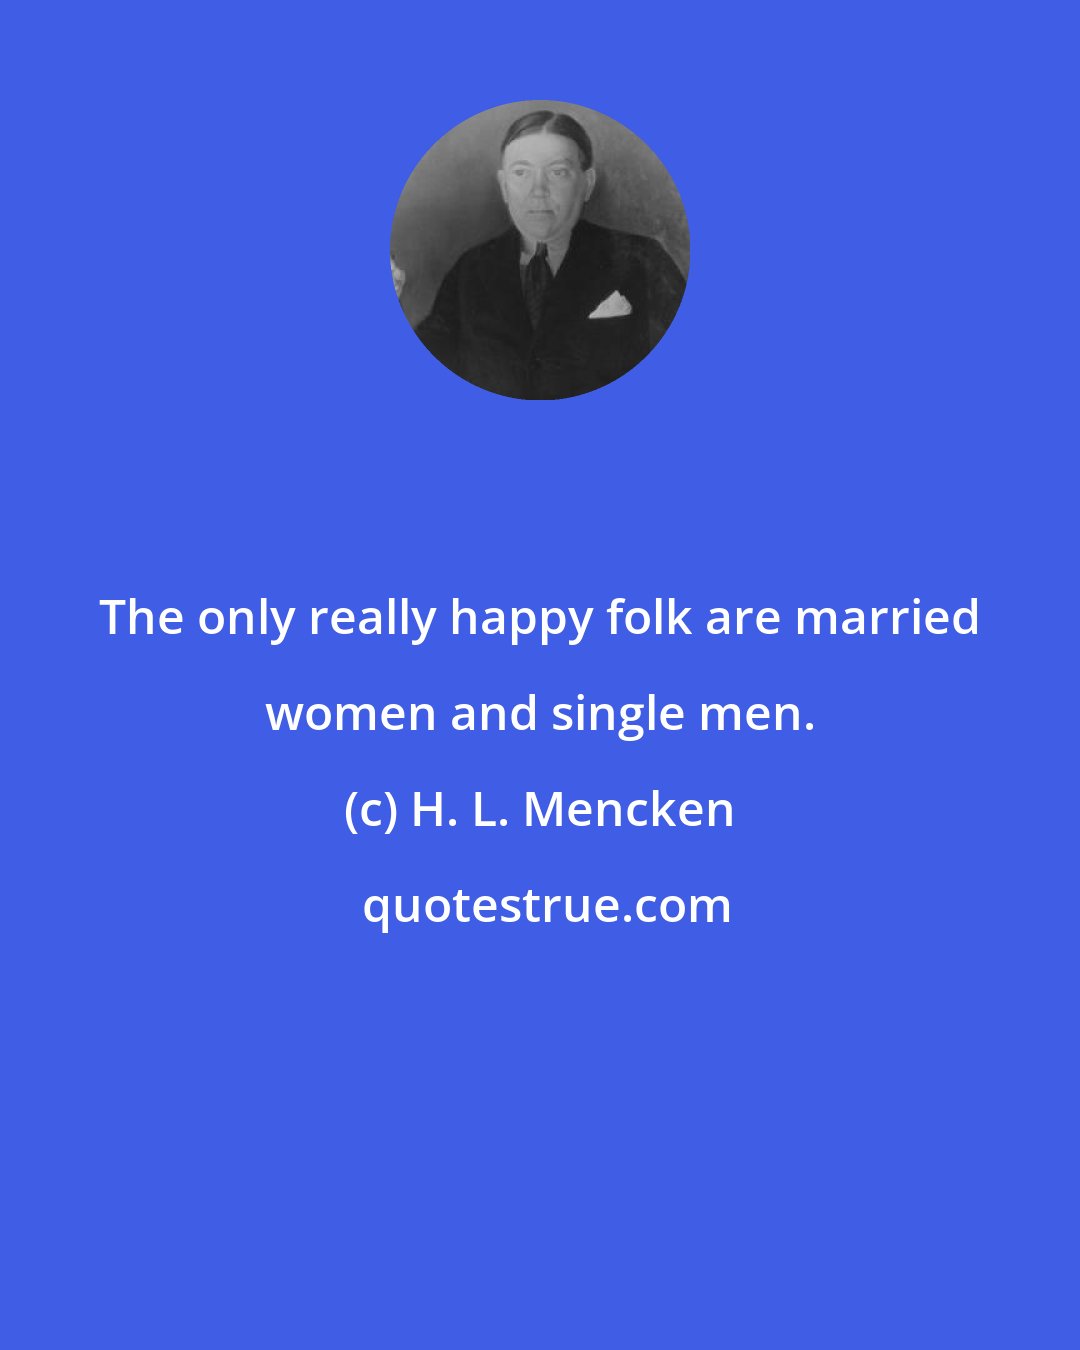 H. L. Mencken: The only really happy folk are married women and single men.